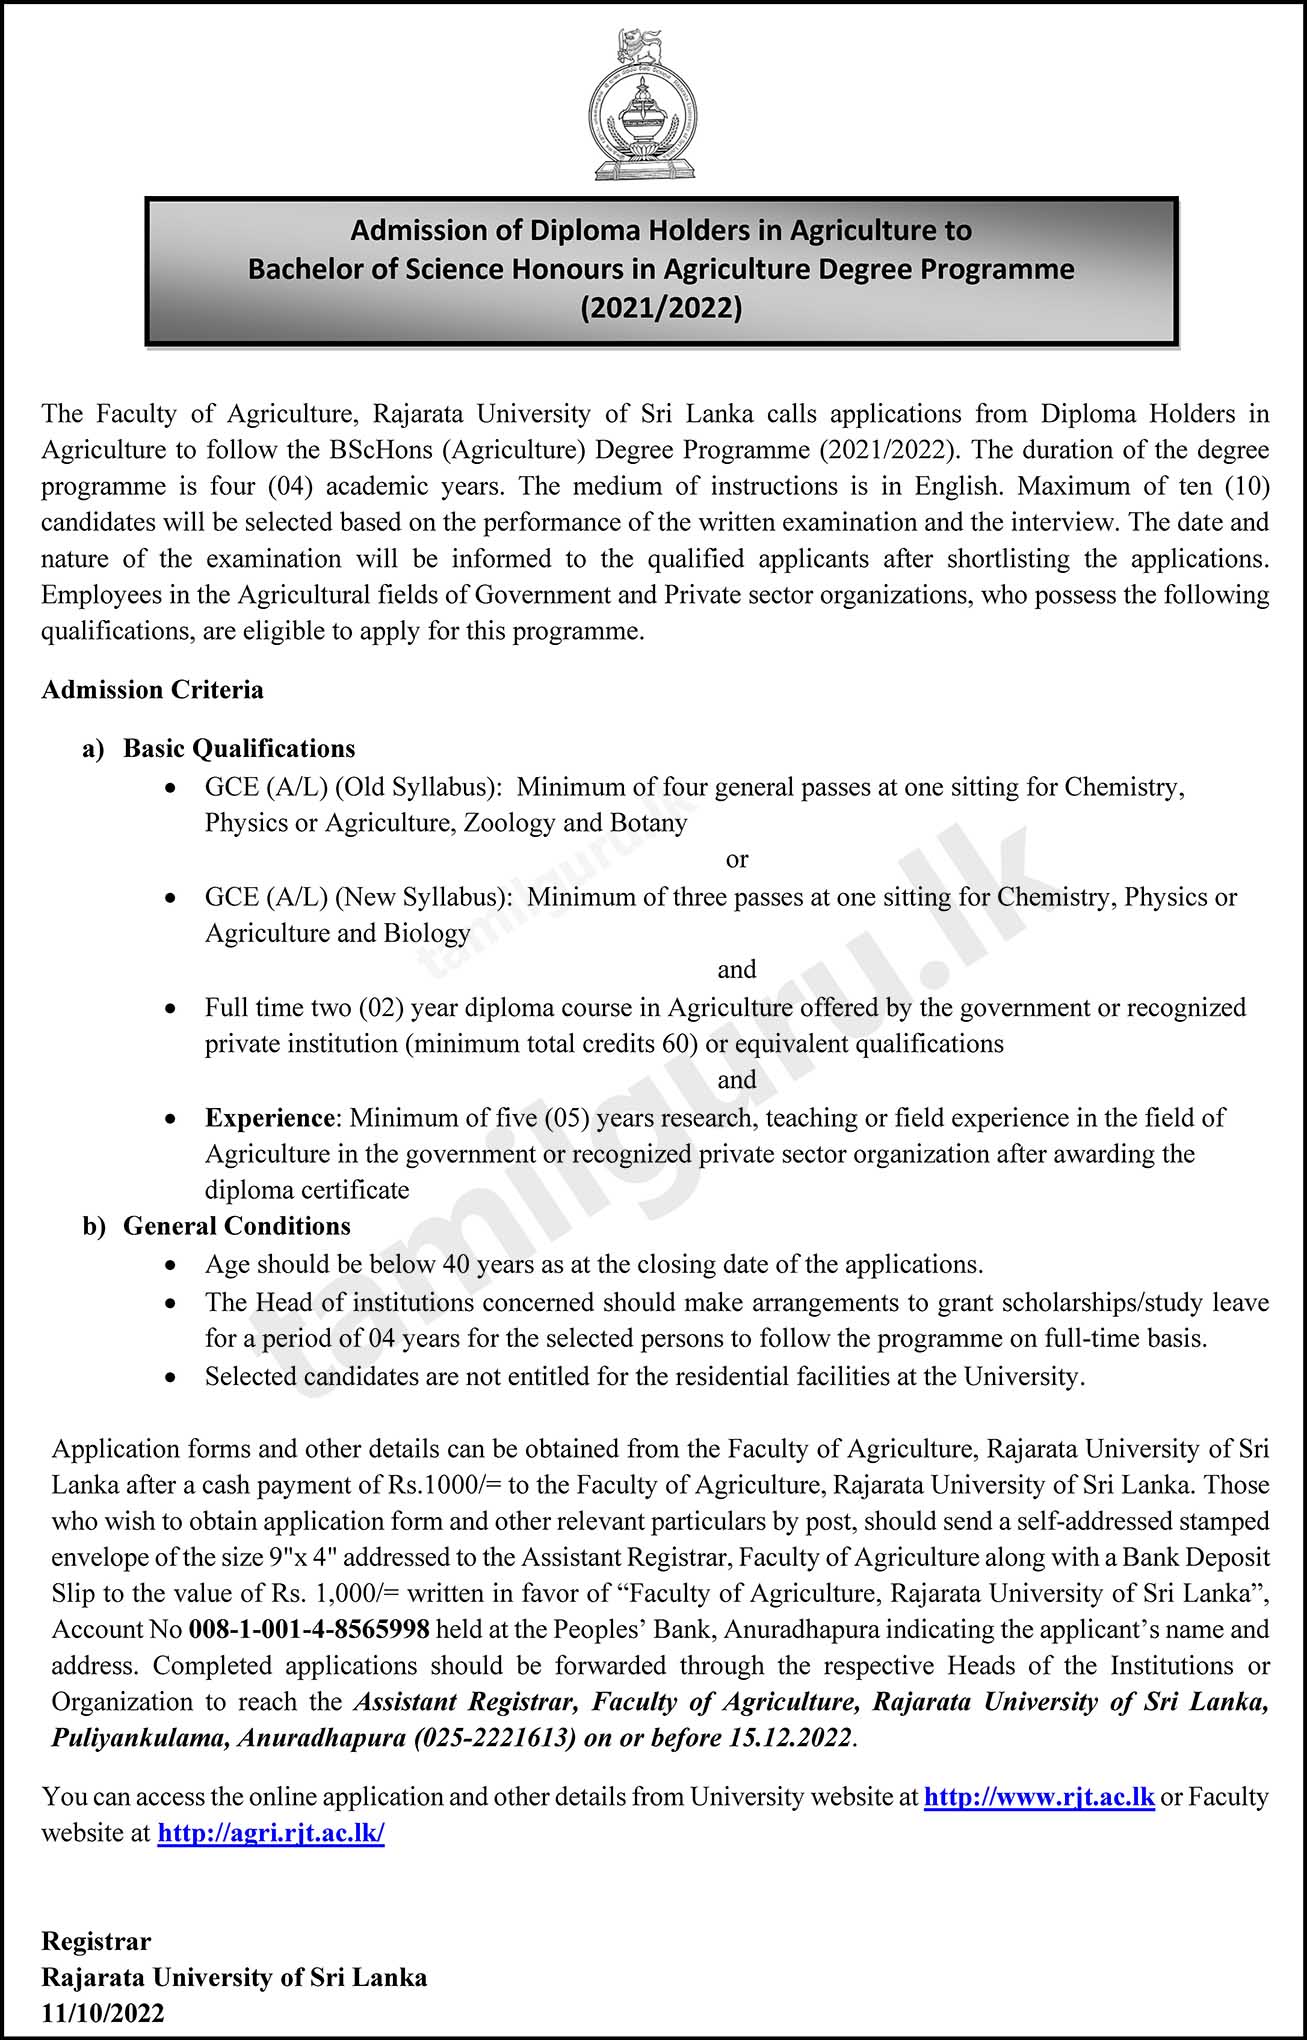 Admission of Diploma Holders in Agriculture to Bachelor of Science (BSc) (Hons) in Agriculture Degree Programme (2021/2022) - Rajarata University of Sri Lanka